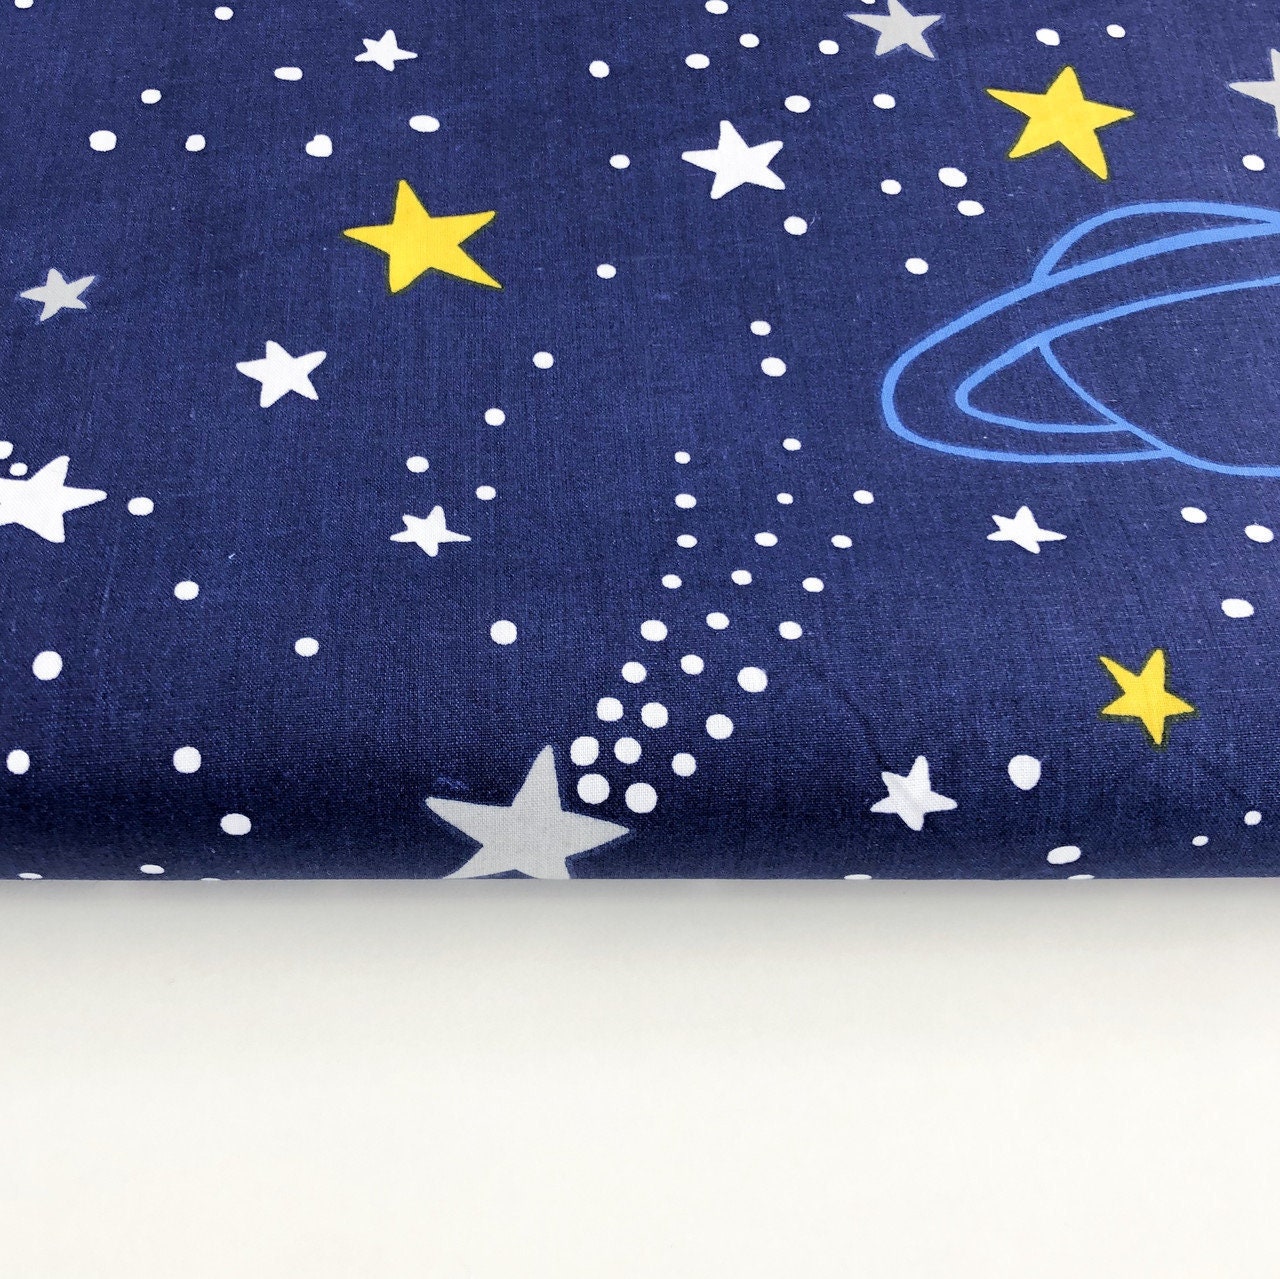 Stars Cotton Fabric Stars fabric by yard Space Fabric | Etsy